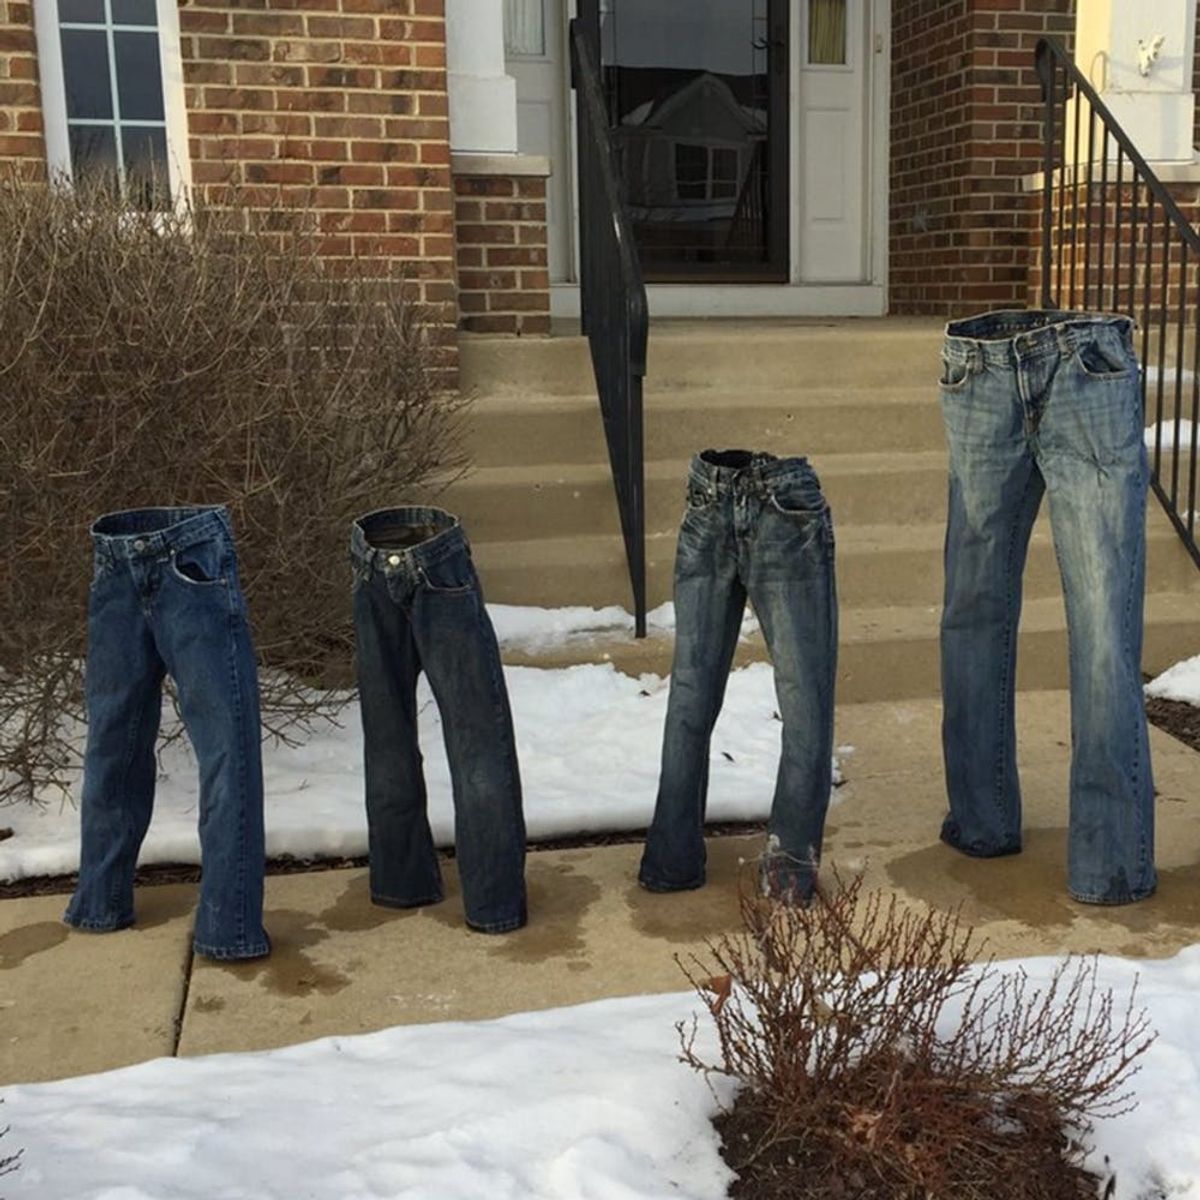 Frozen Pants are the Hilarious Winter Lawn Decoration Missing in Your Life